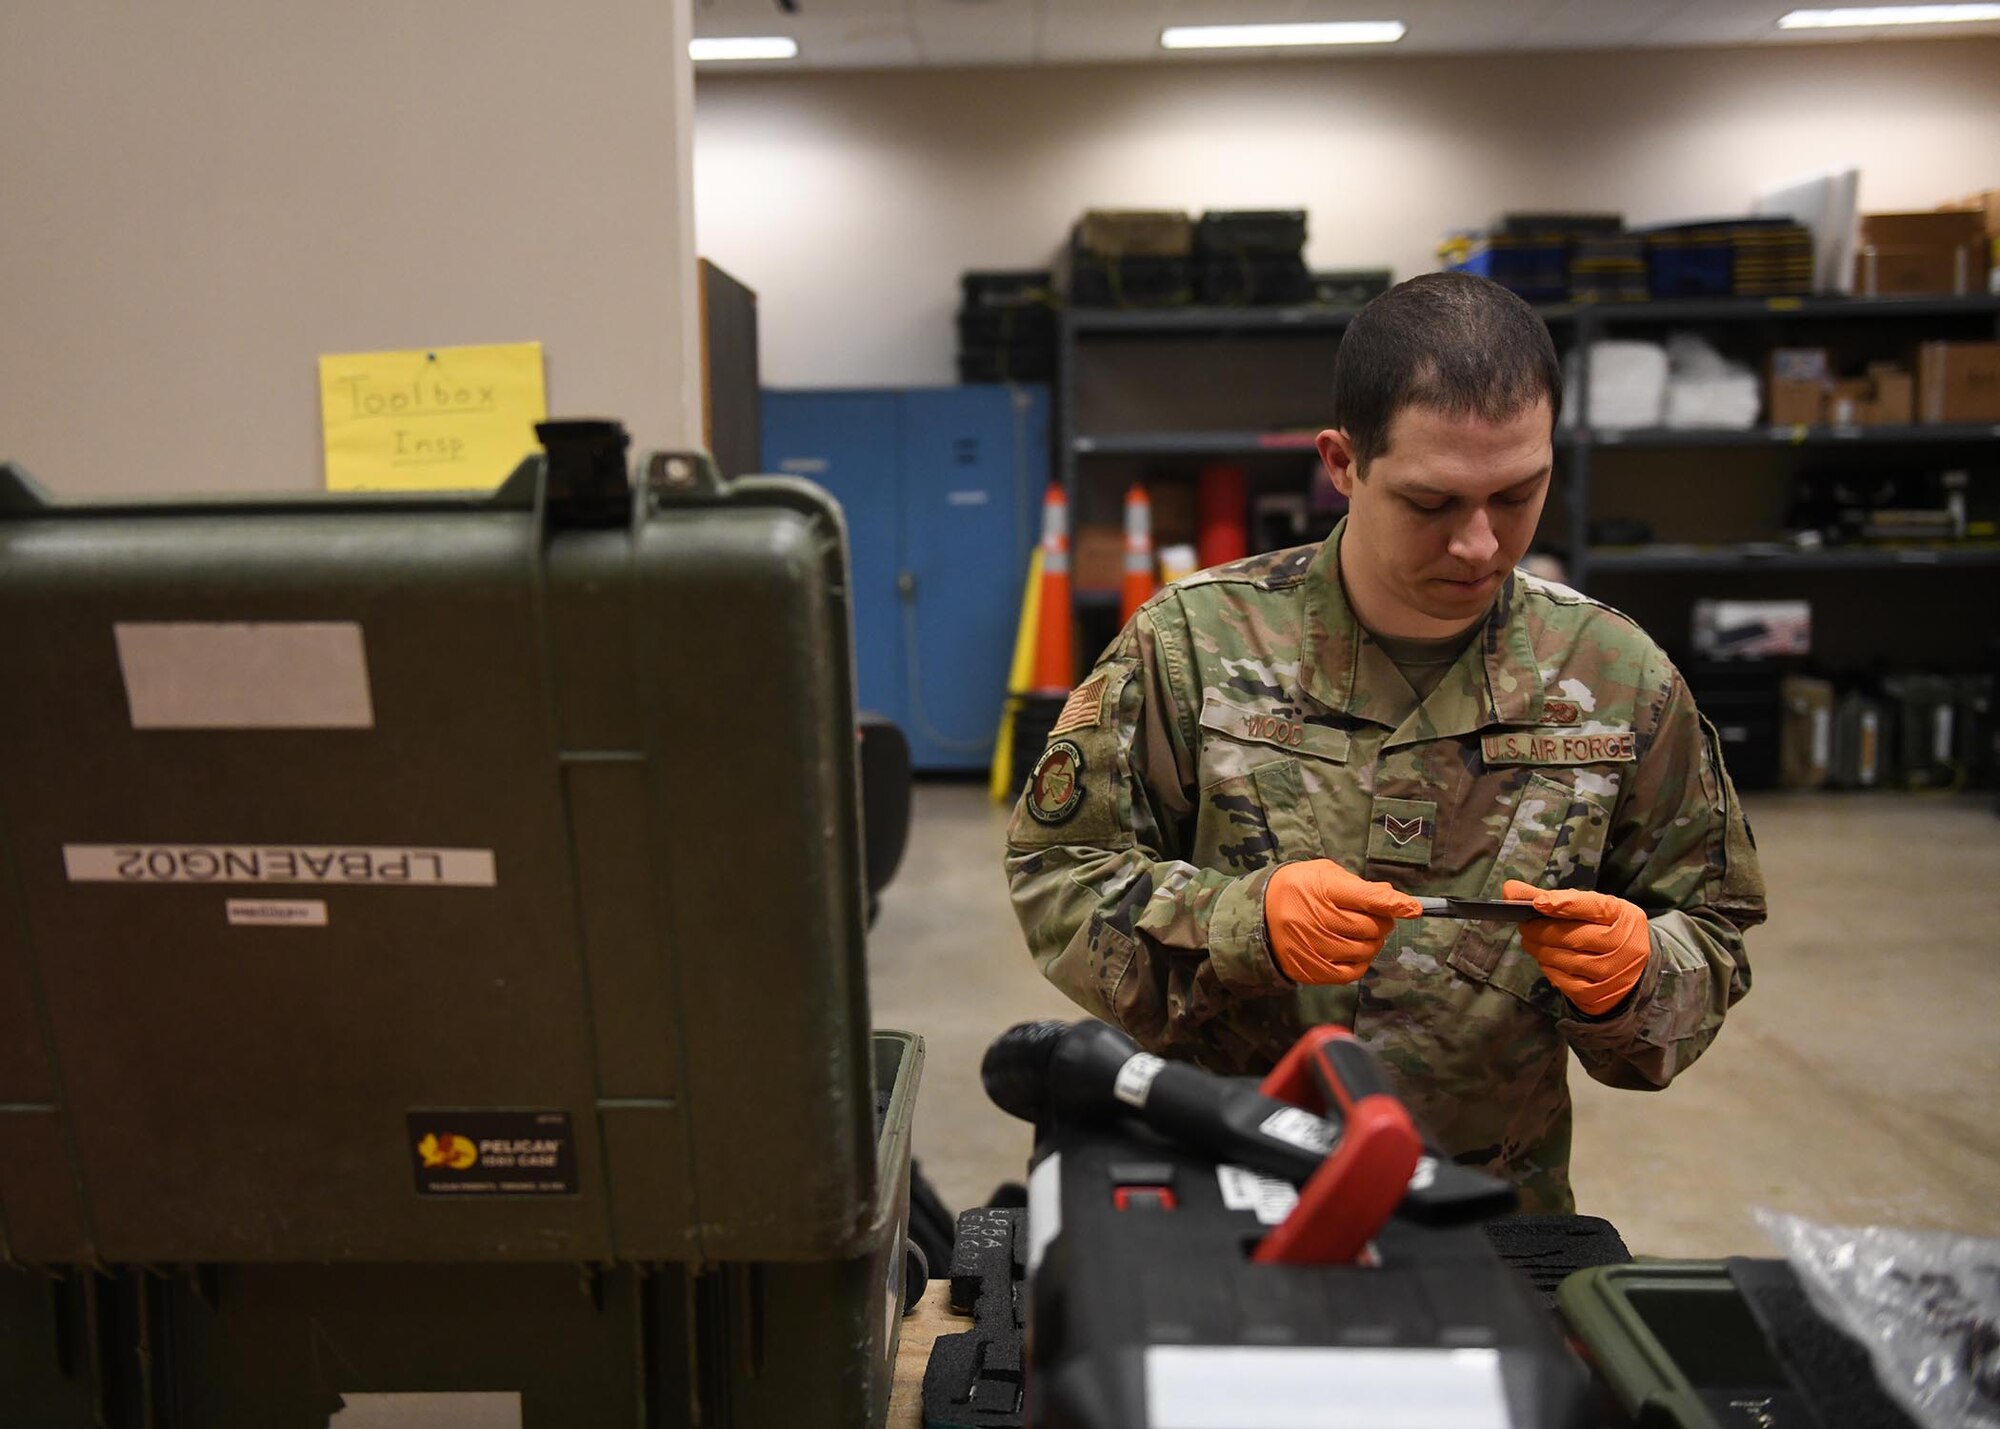 An Airman inspects a small tool.